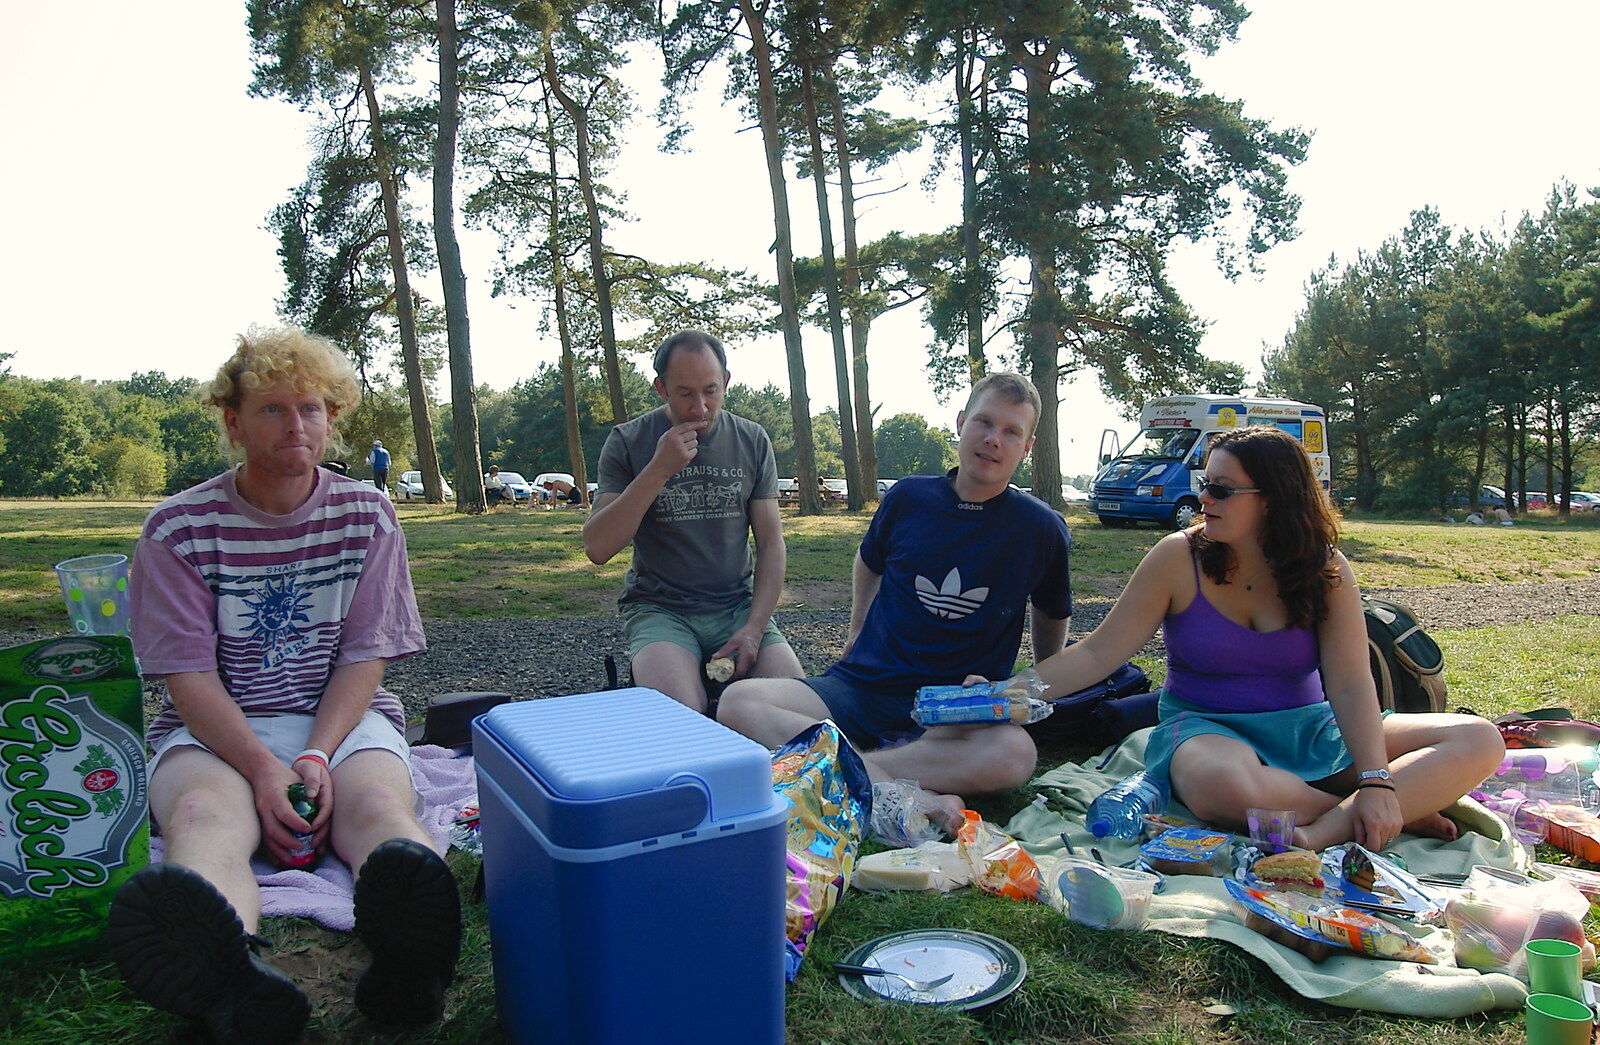 More picnicking from Picnic at the Heath, Knettishall, Norfolk - 4th September 2005